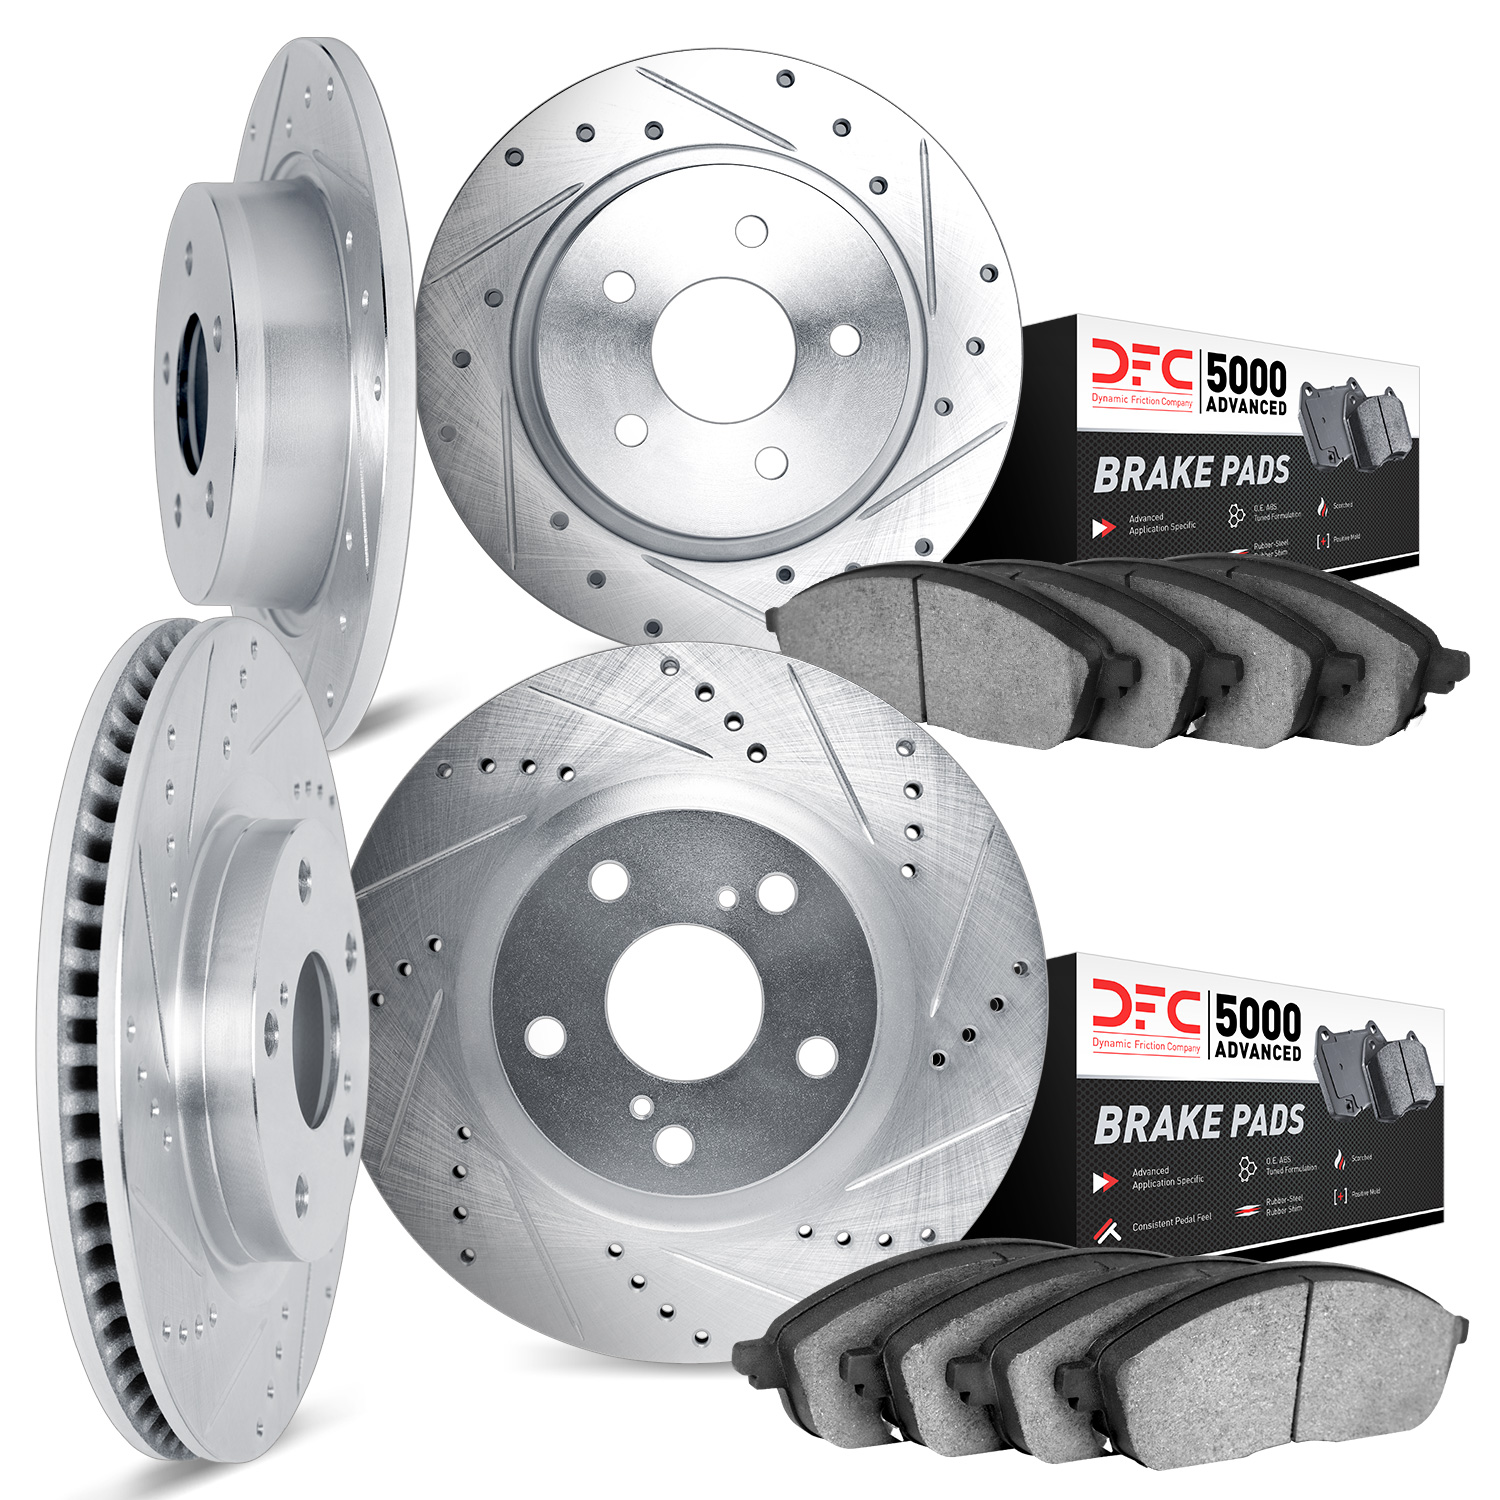 7504-59051 Drilled/Slotted Brake Rotors w/5000 Advanced Brake Pads Kit [Silver], 2015-2017 Acura/Honda, Position: Front and Rear